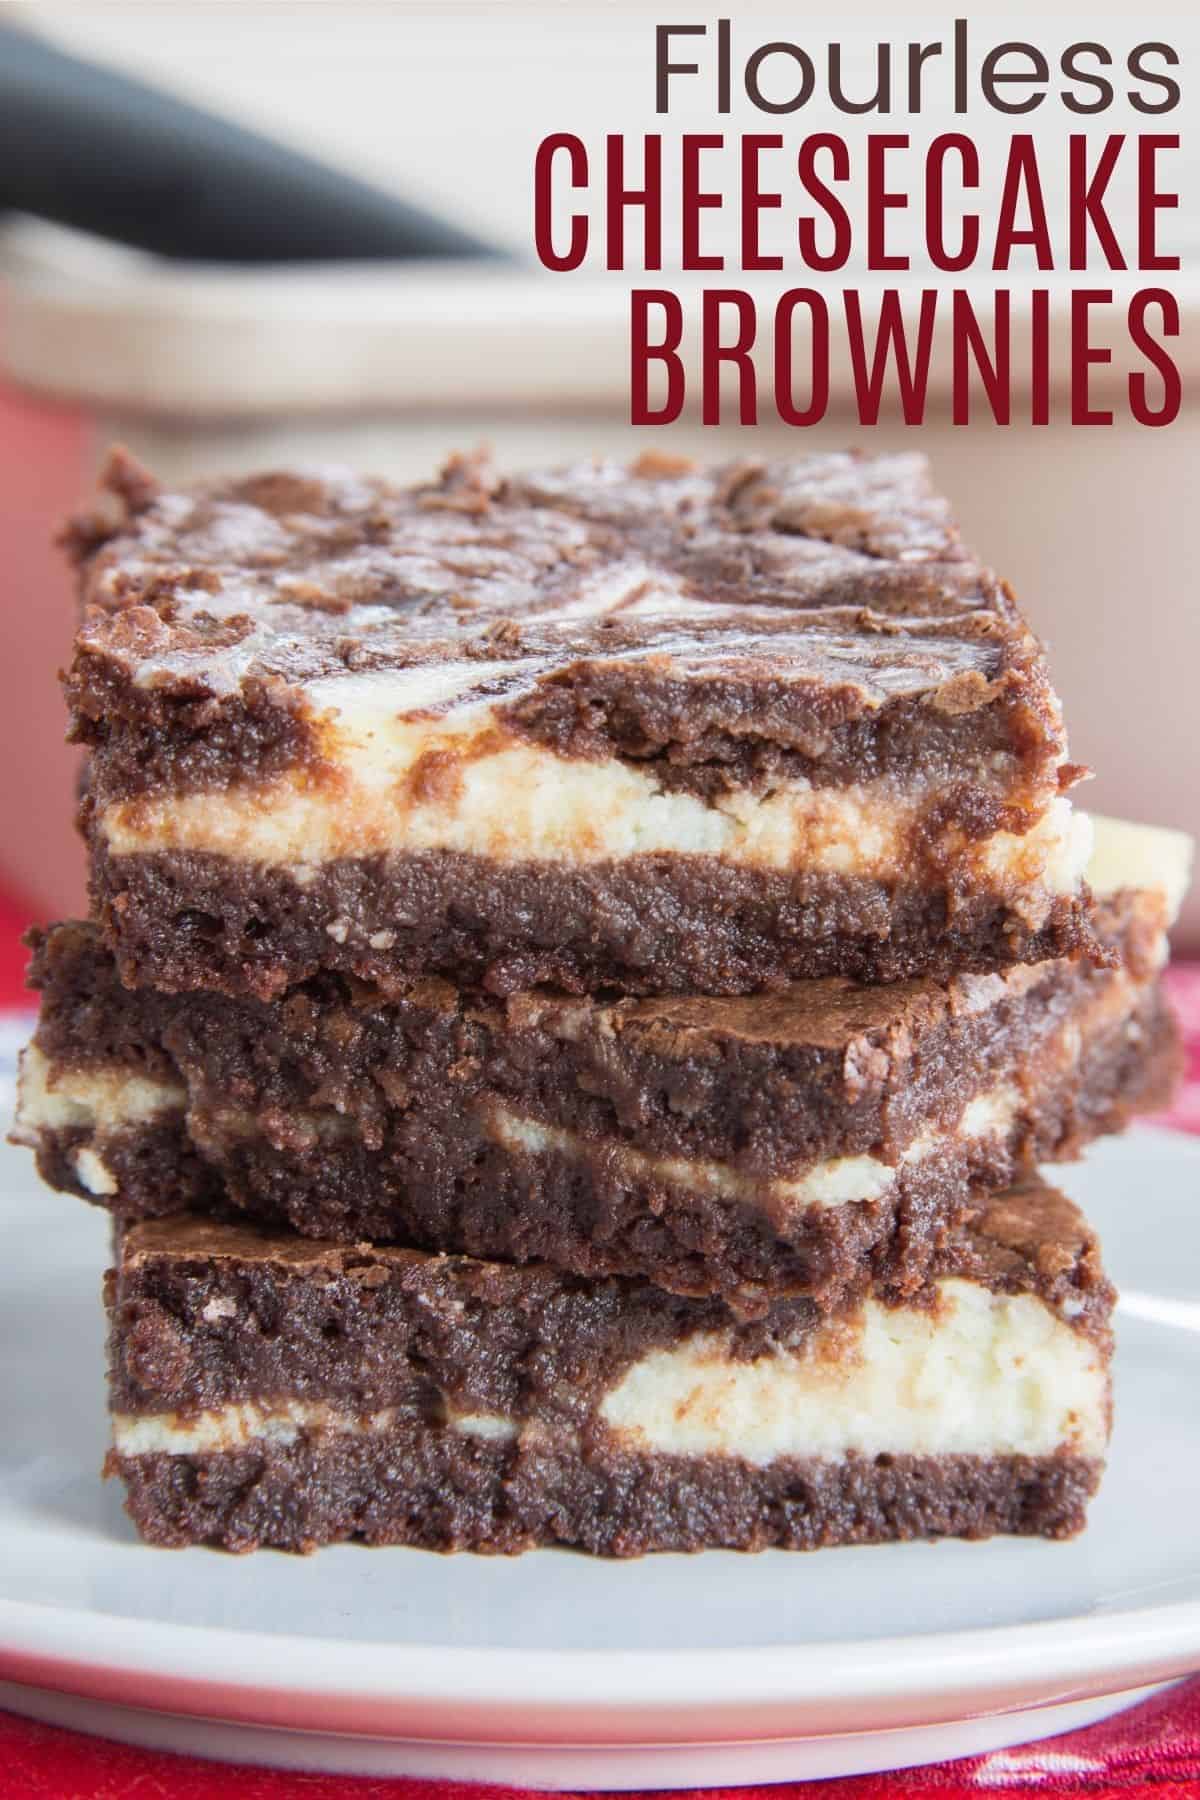 Flourless Ricotta Cheesecake Swirl Brownies - a classic and classy chocolate dessert with ripples of cheesecake through rich and fudgy brownies. | cupcakesandkalechips.com | gluten free recipe